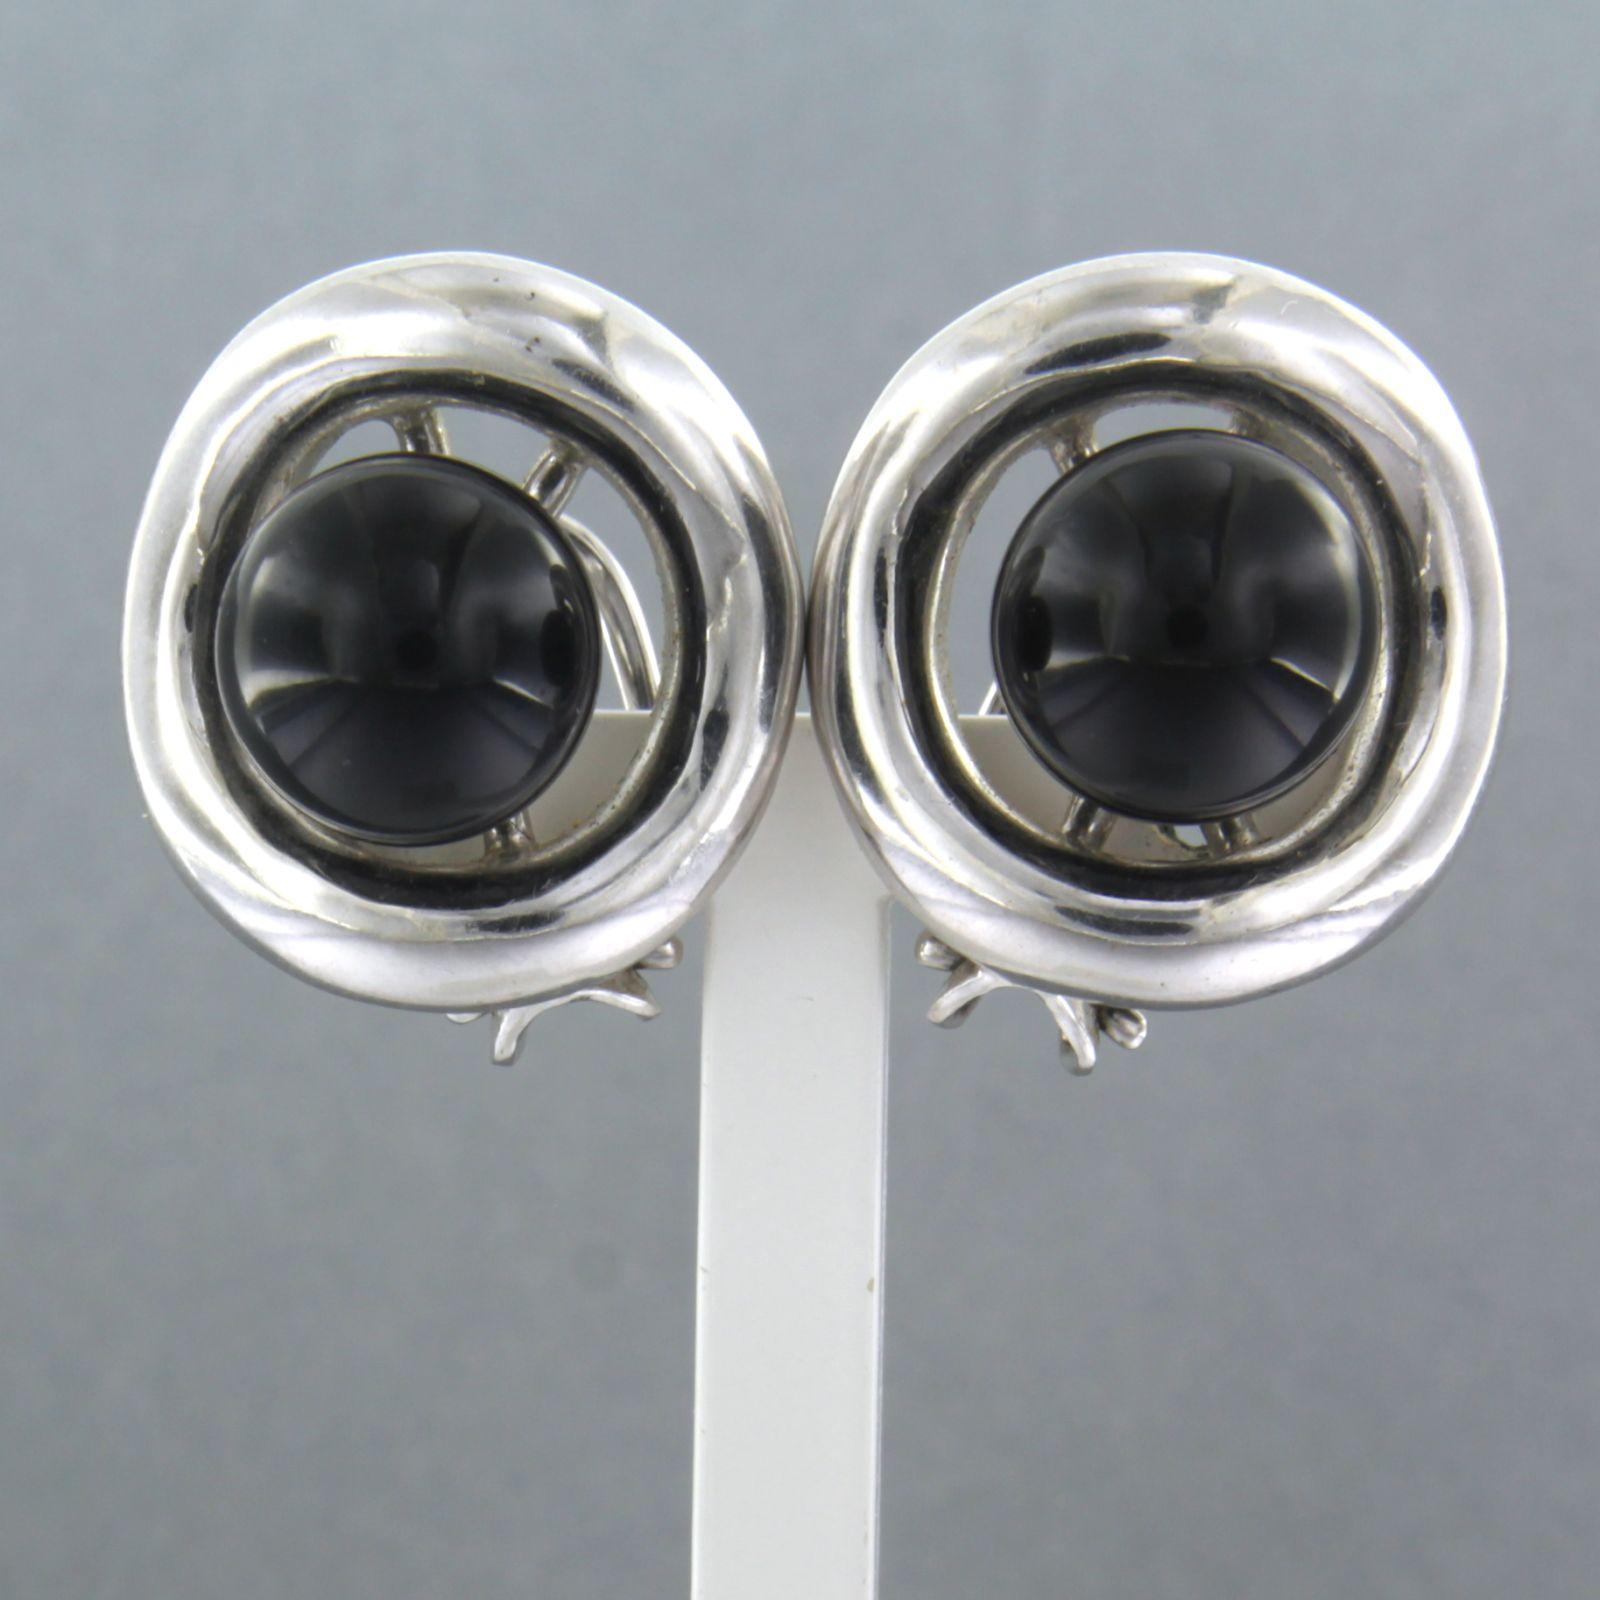 18k white gold ear clips set with onyx

detailed description:

the top of the ear clip is 2.0 cm high and 1.8 cm wide

Weight 14.0 grams

Occupied with

- 2 x 1.0 cm bead shape cut onyx

colour black
purity n/a
Gemstones have often been treated to